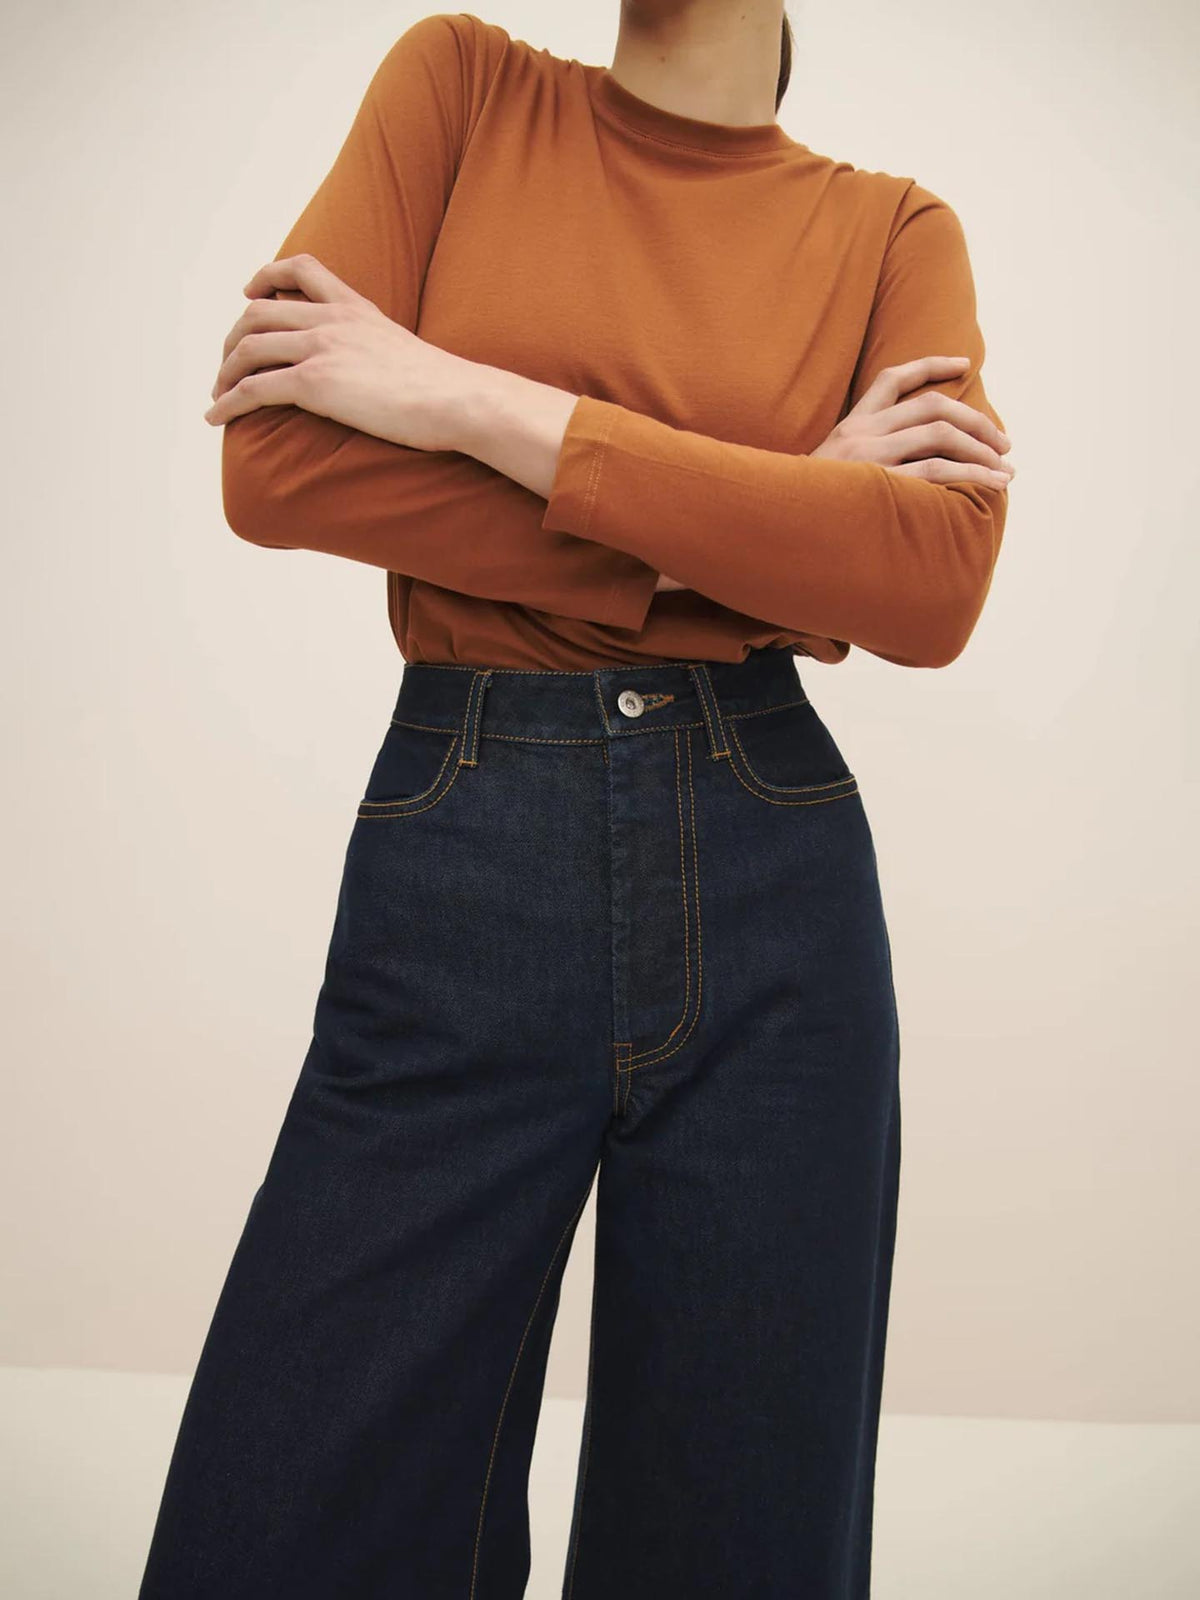 Person wearing a burnt orange long-sleeve shirt and Kowtow&#39;s High Puddle Jeans in Indigo Denim, standing with arms crossed. Only the torso and legs are visible.